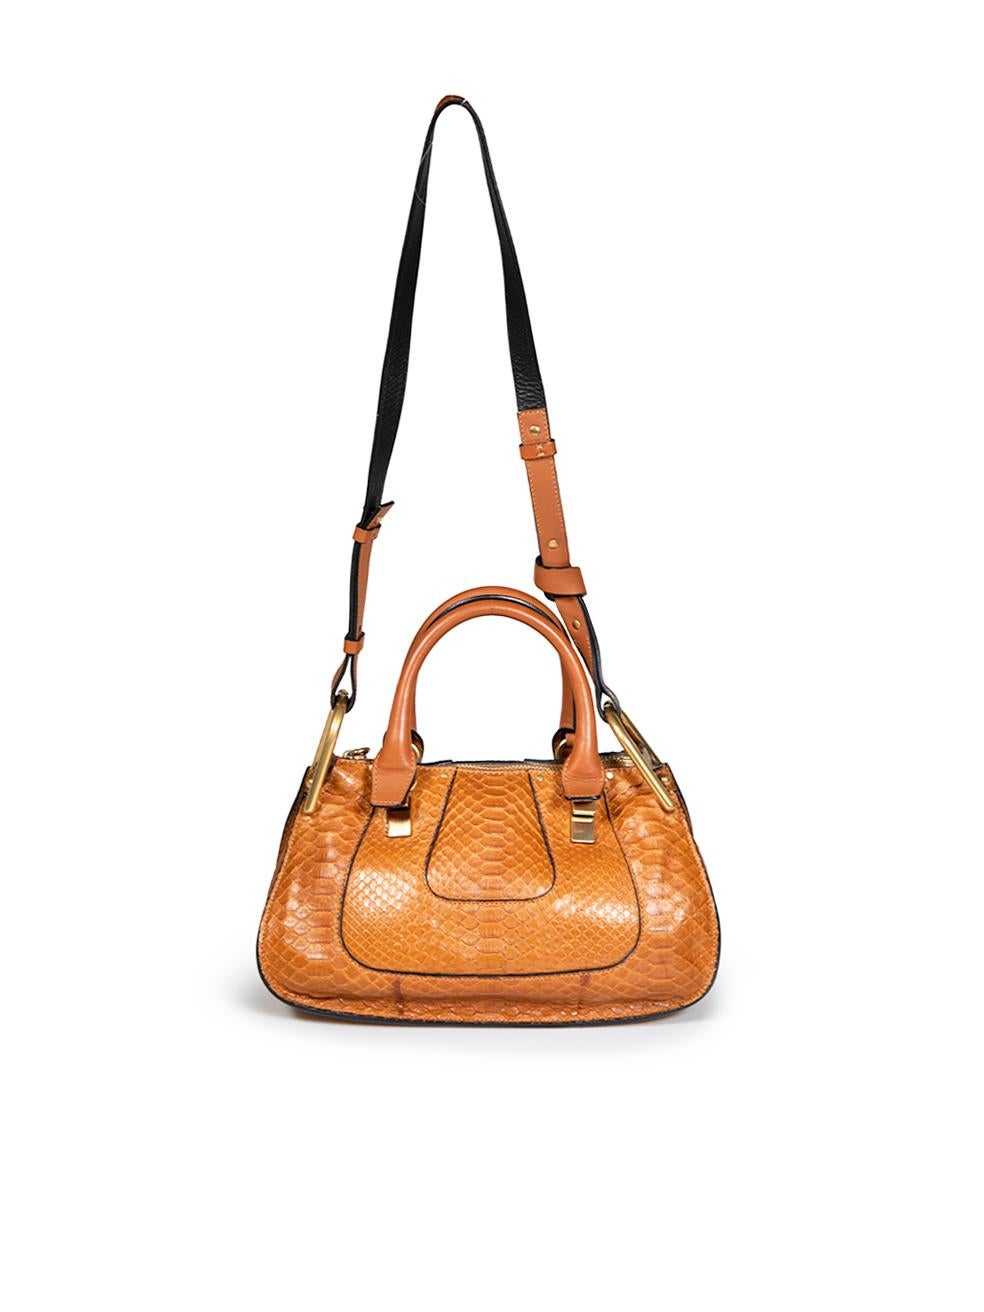 Chloé Caramel Python Calfskin Small Hayley Double Carry Satchel In Good Condition For Sale In London, GB